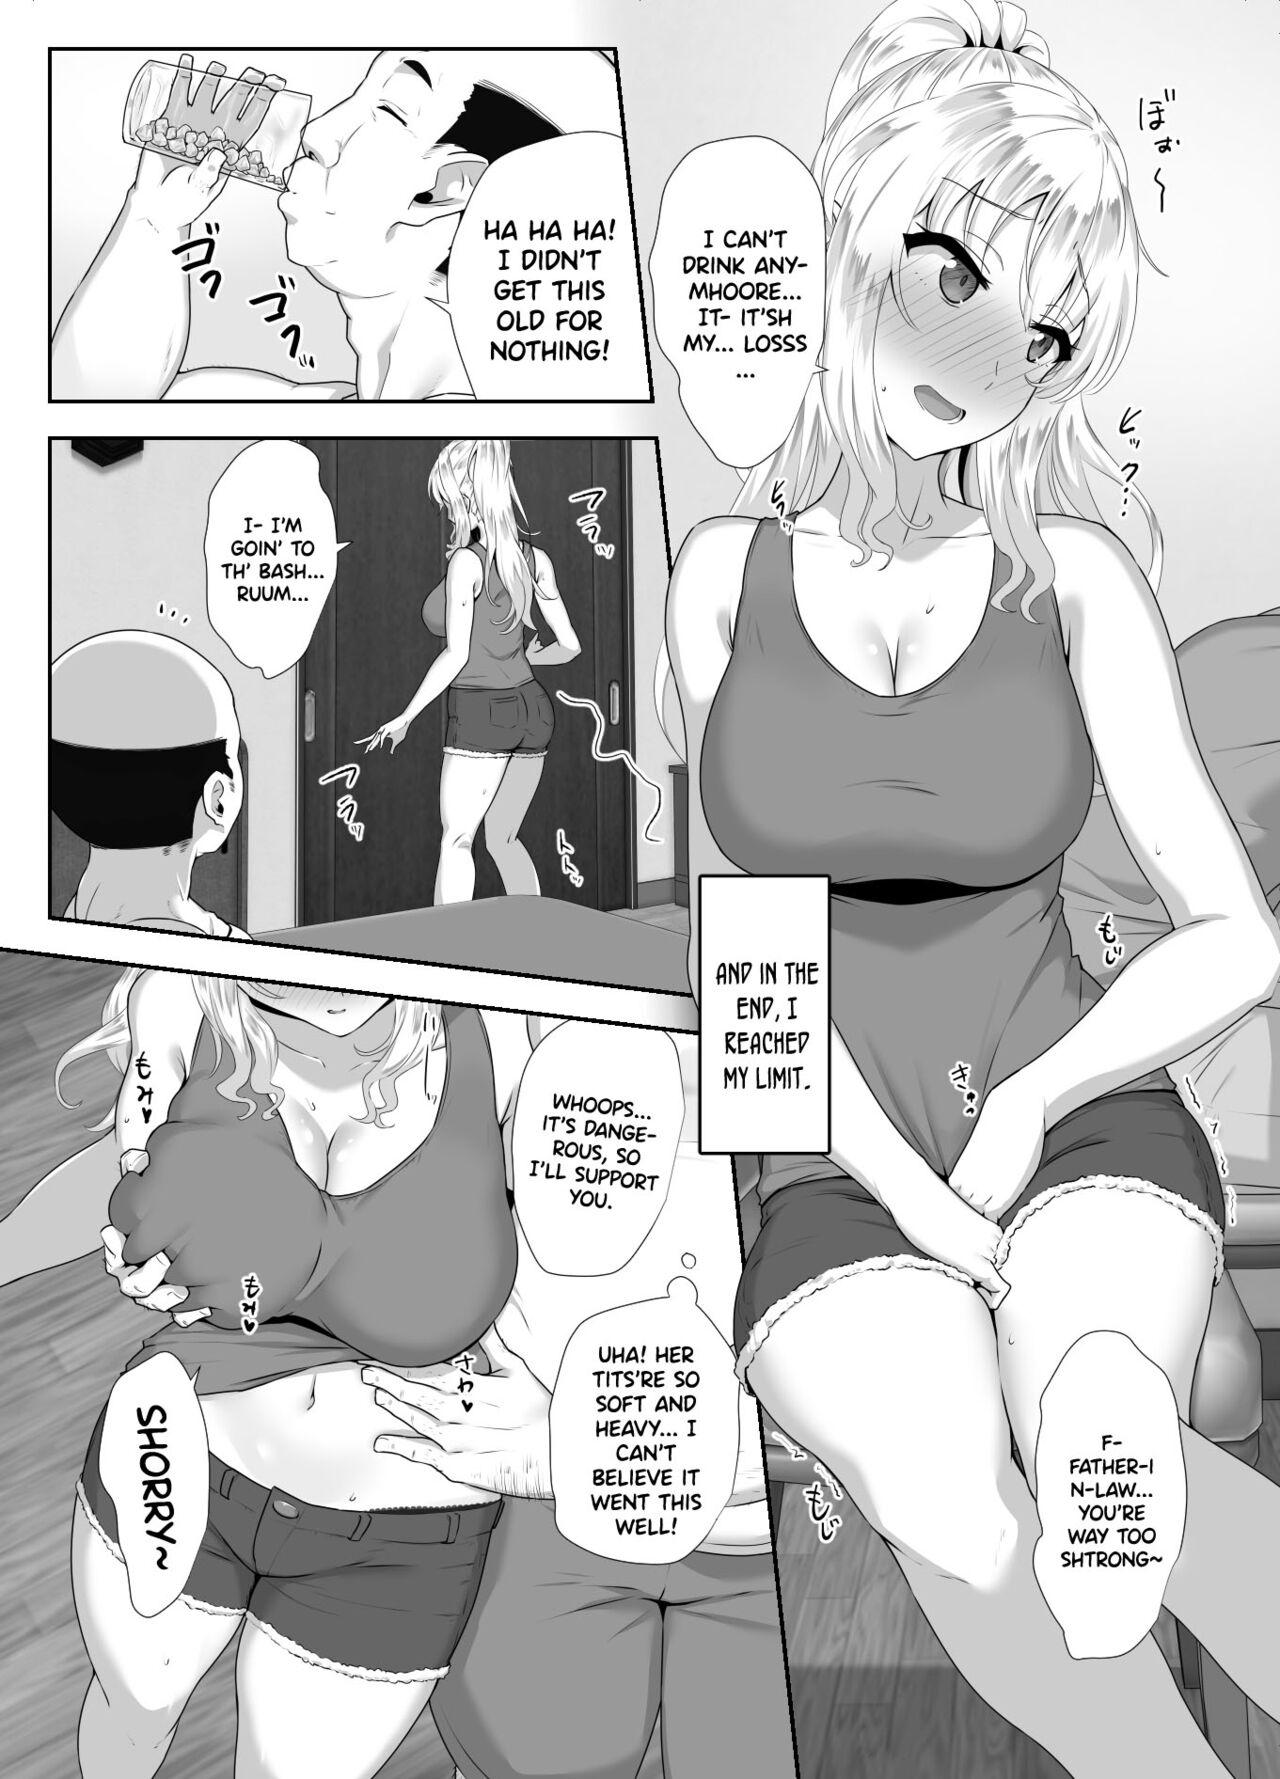 Play Russia-jin ga Osake de Nihonjin ni Makeru Wakenai Deshou? | There's No Way a Russian Could Lose to a Japanese Person In Drinking, Right? - Original Shaved Pussy - Page 8